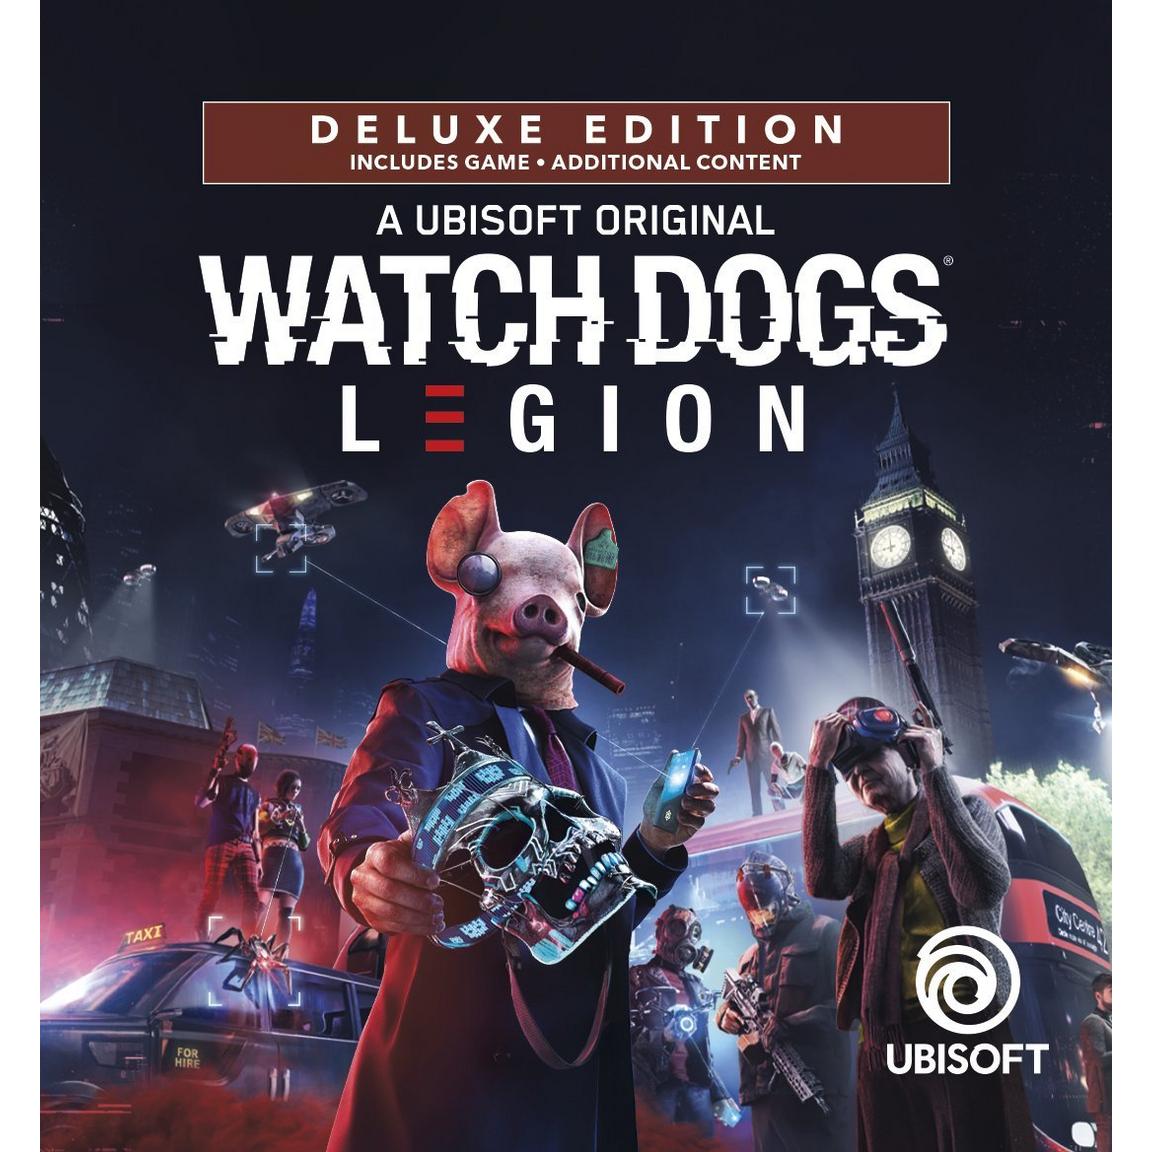 Watch Dogs Legion Deluxe Edition for Xbox Series X|S or Xbox One by Ubisoft [Digital Download]